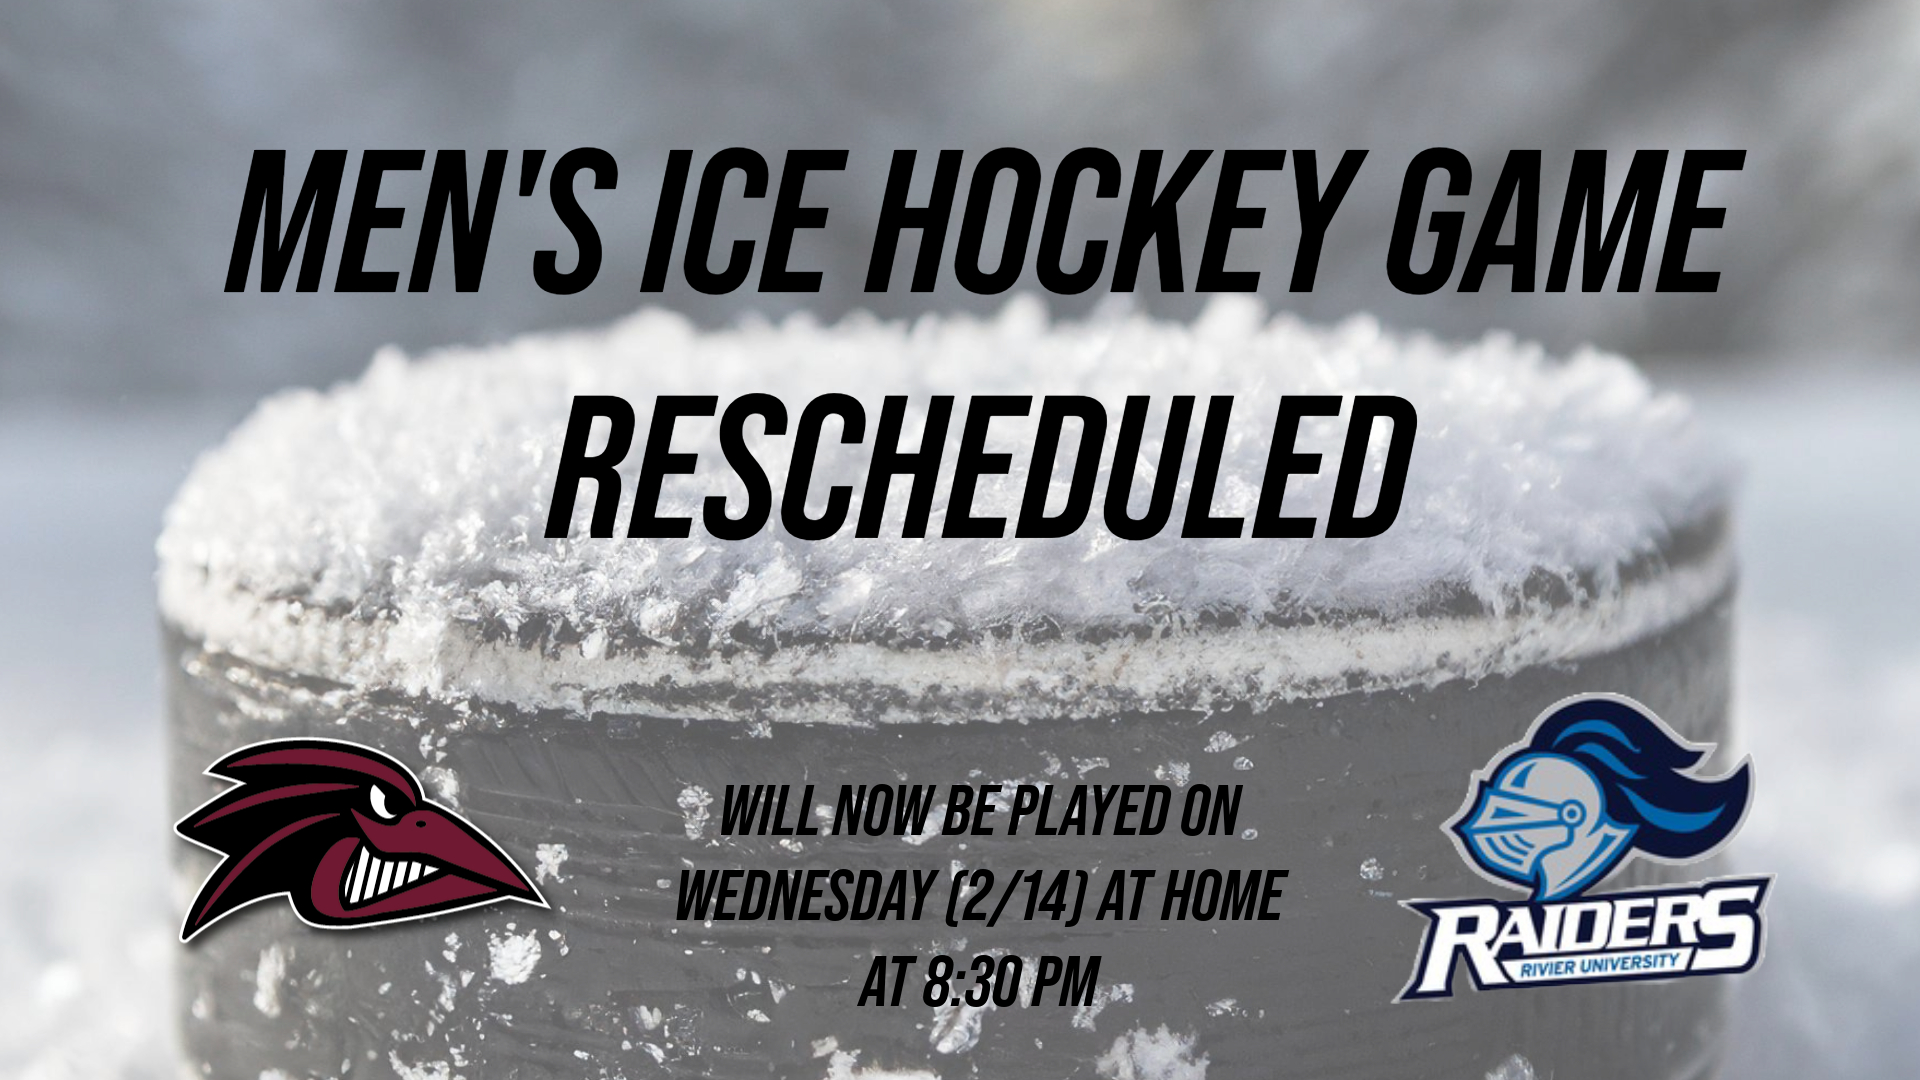 Rescheduling Announcement: Men's Ice Hockey Game Moved Due to Snow Storm